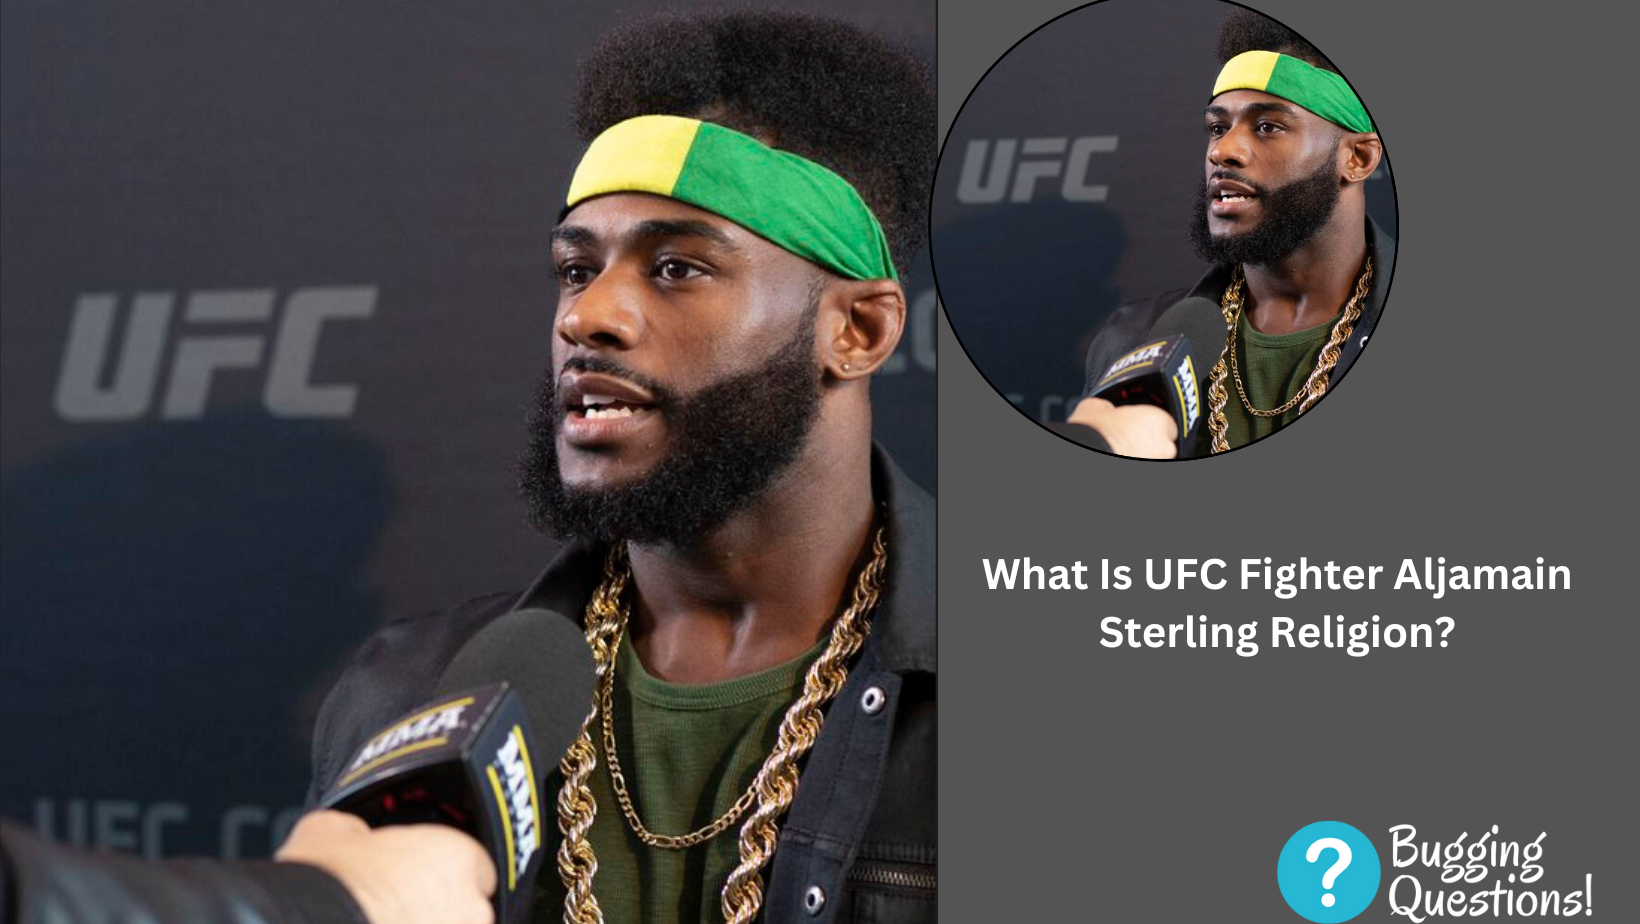 What Is UFC Fighter Aljamain Sterling Religion?